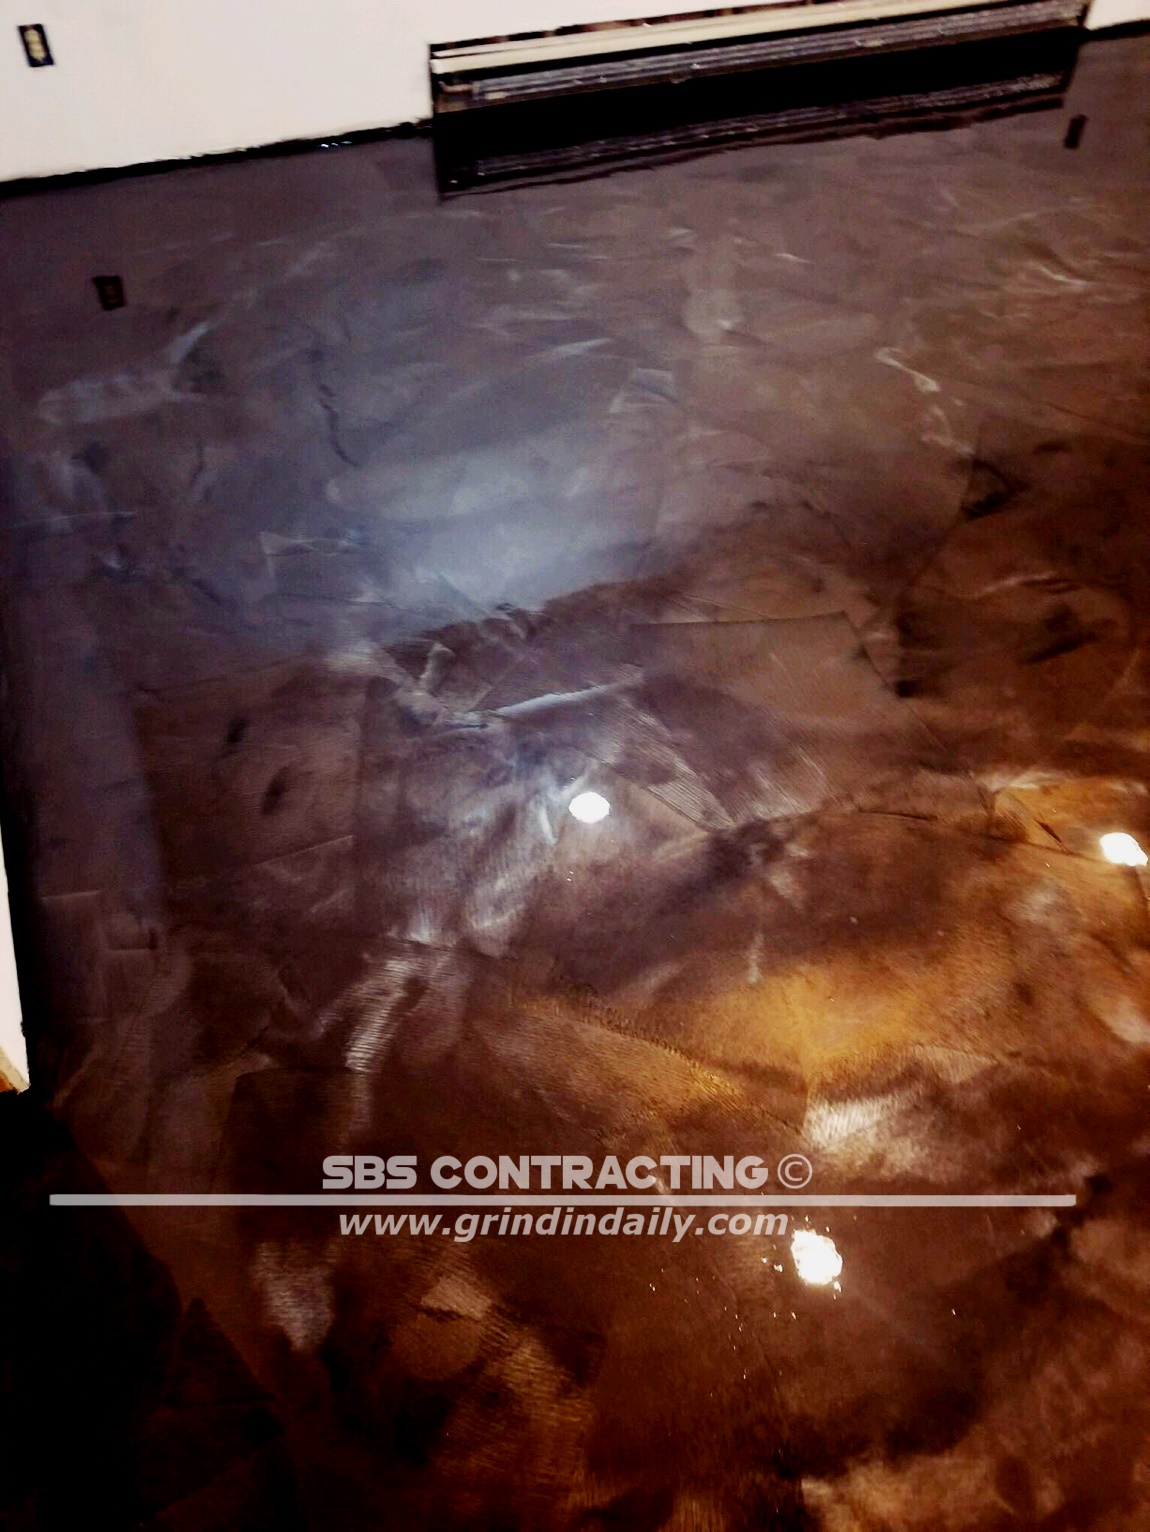 SBS-Contracting-Concrete-Stain-Project-Metallic-02-2018-01-03